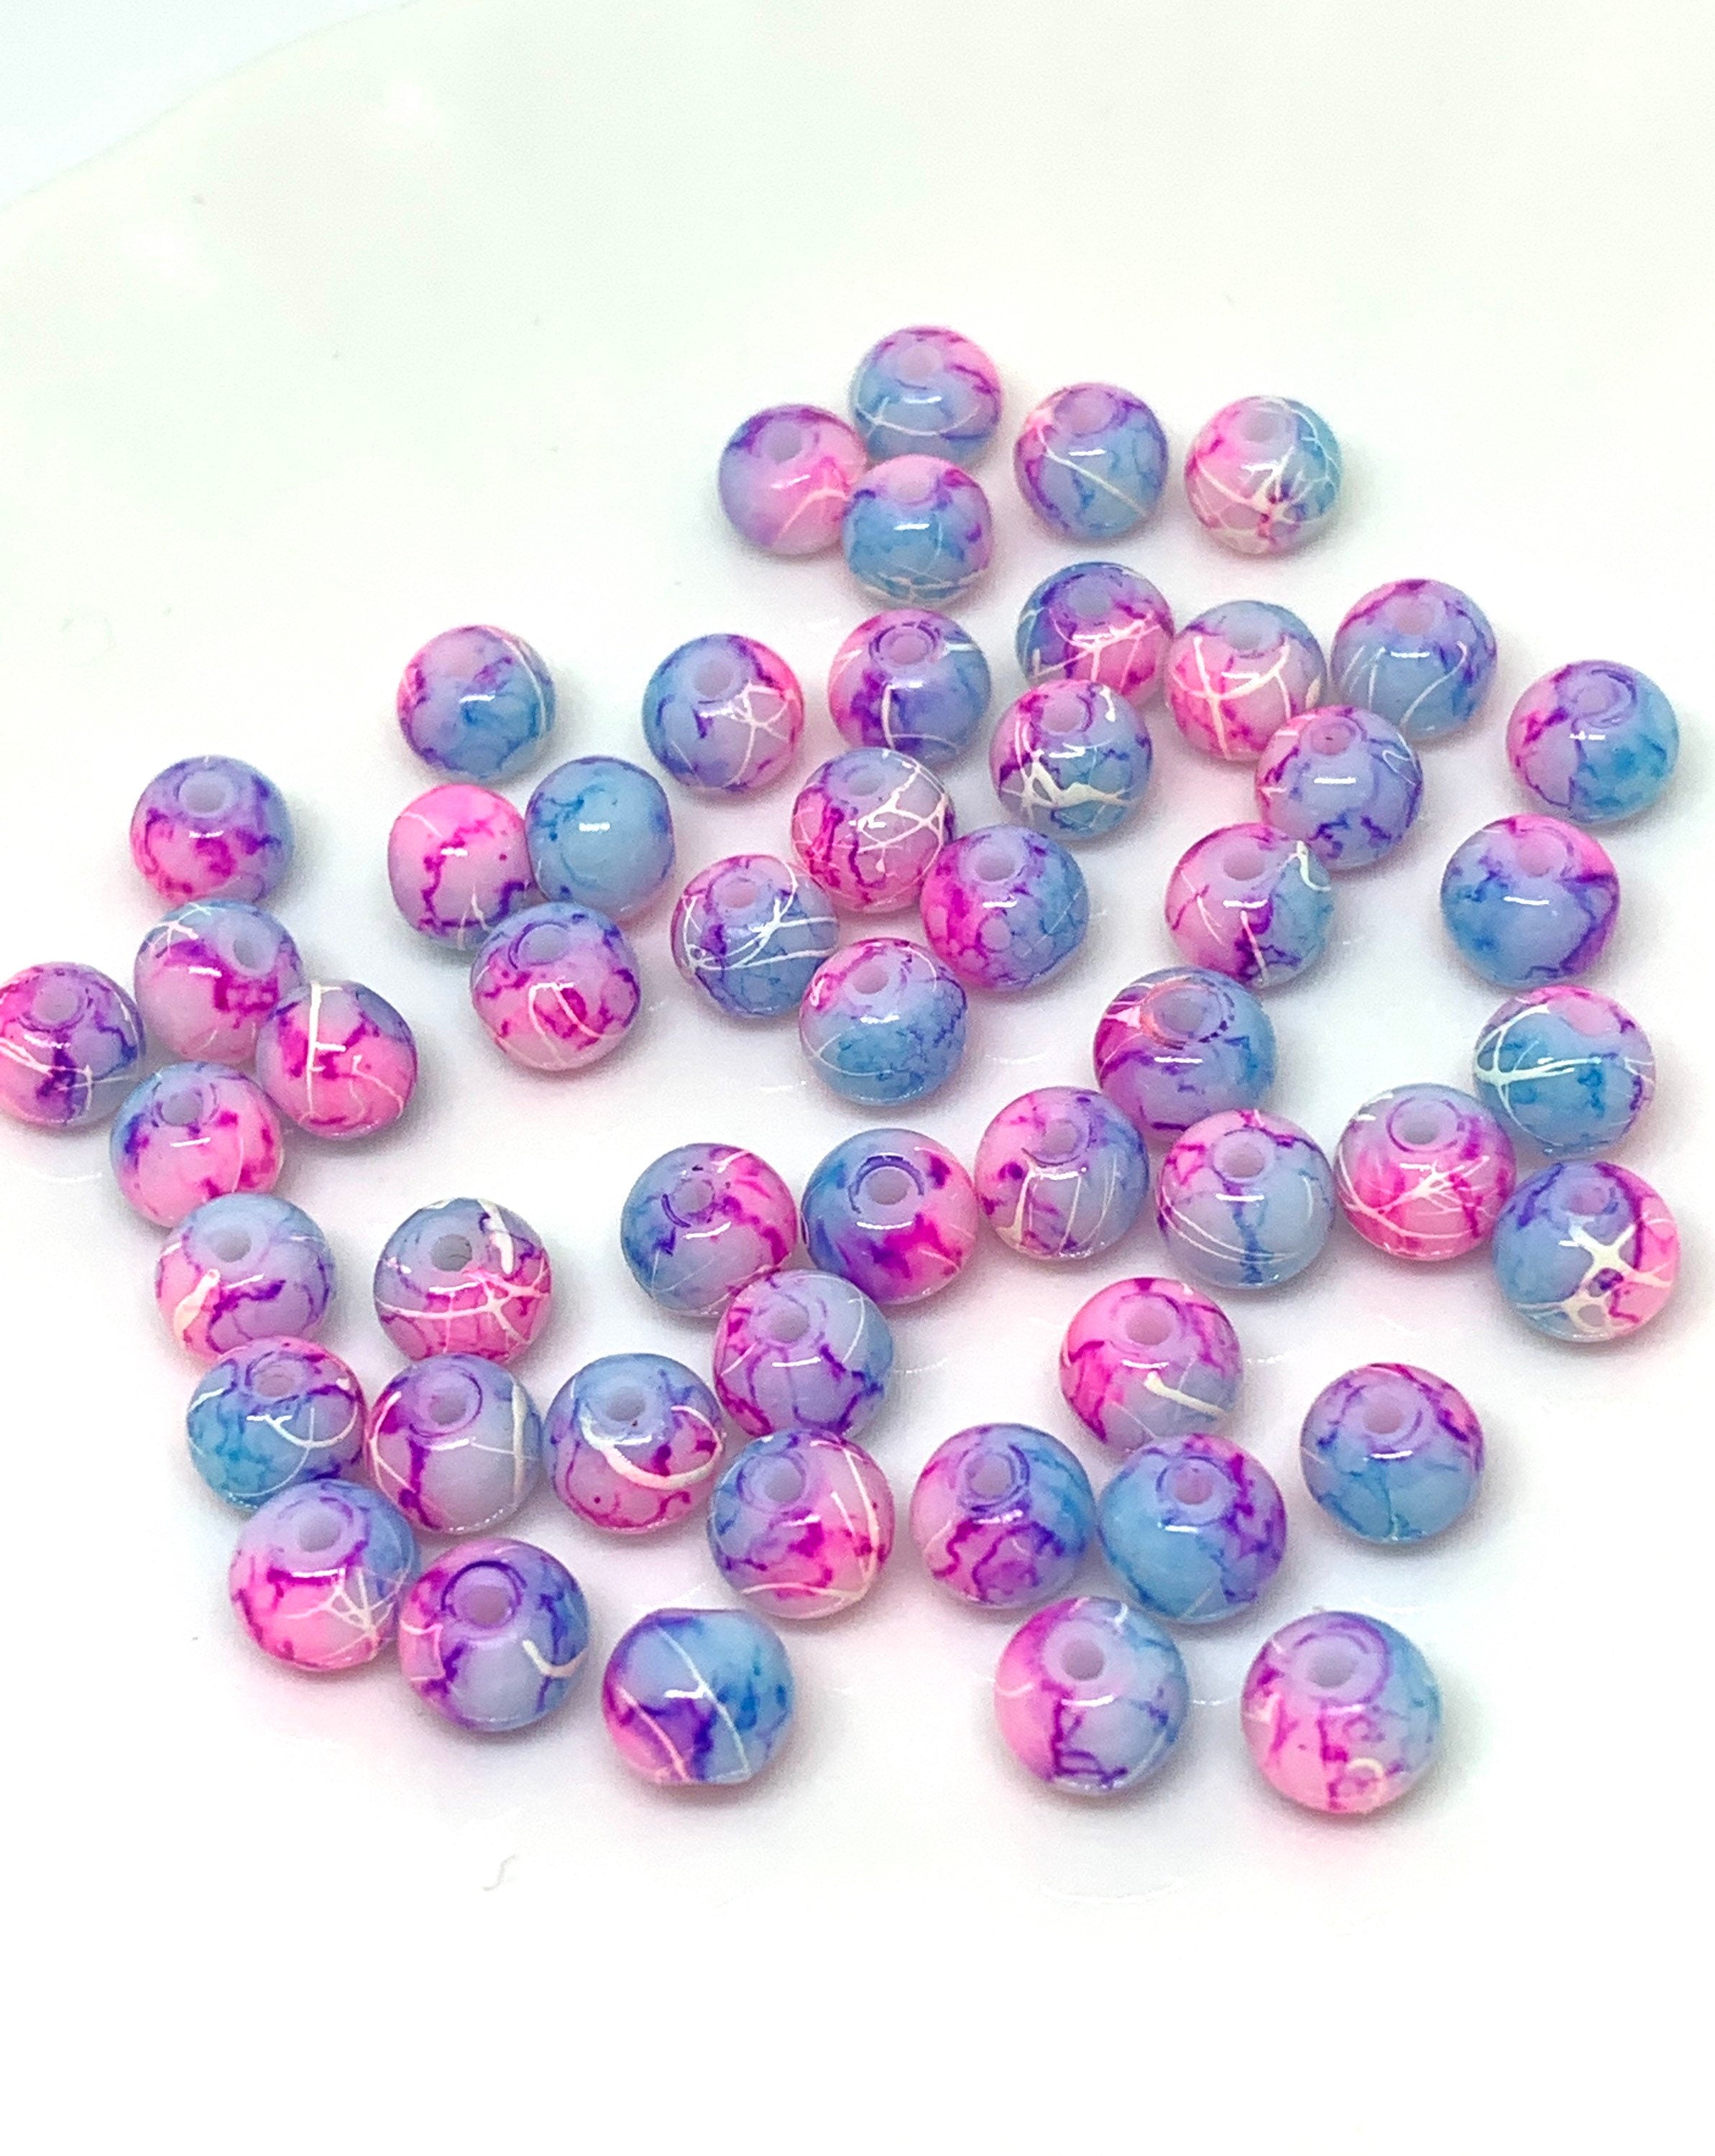 Pink and Blue Tie Dye Beads, Unique Beads, Mermaid Beads for Necklace,  Mermaid Beads for Bracelet, Unique Beads 4mm, 6mm Beads